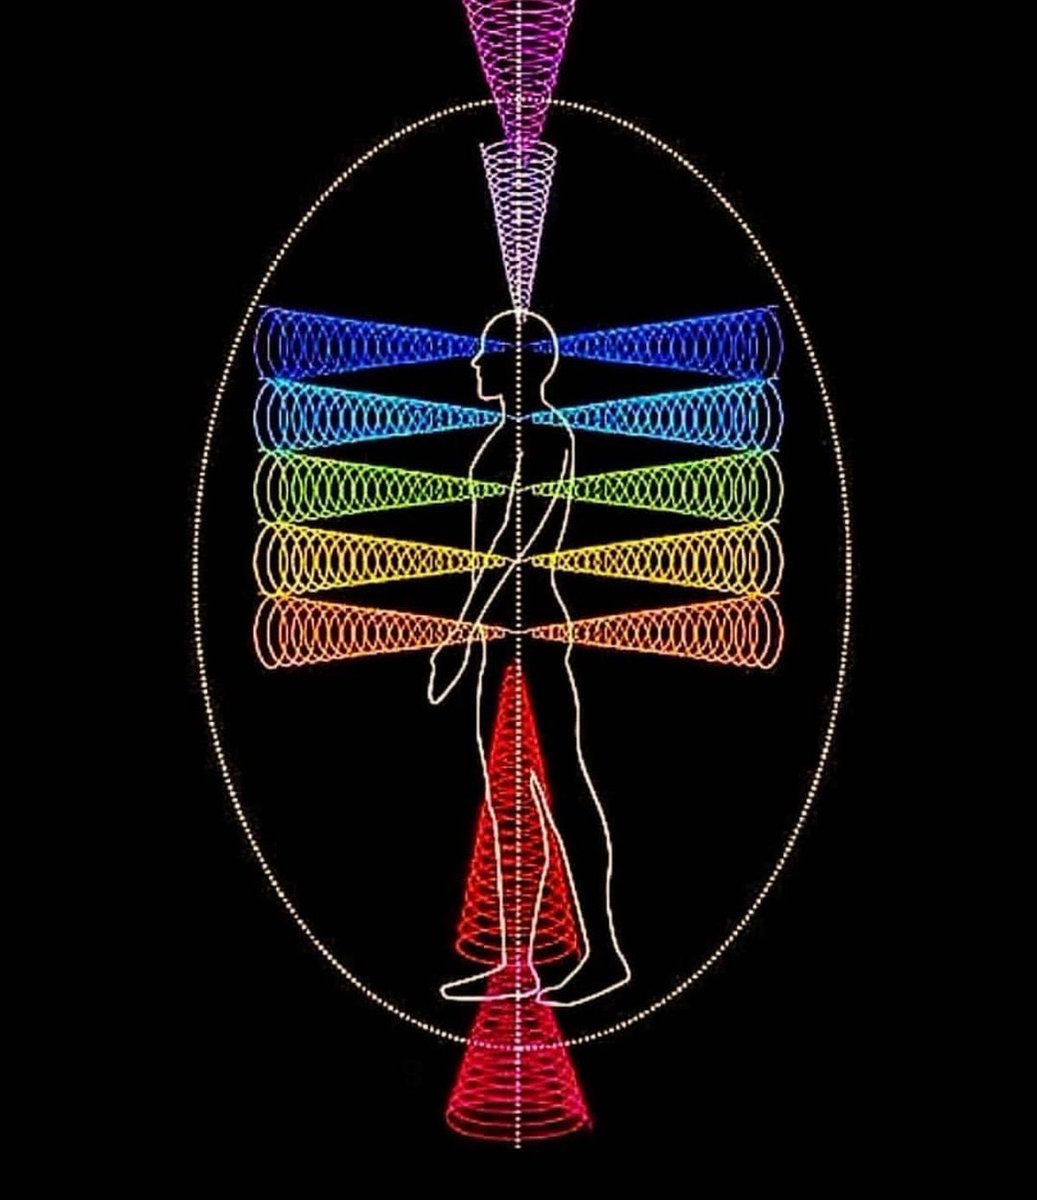 Spinal movement is intimately involved with spiritual energy. 

The bone acts as a receiver to energetic forces - the more compressed and small the spine is = harder time to tap in to the frequency